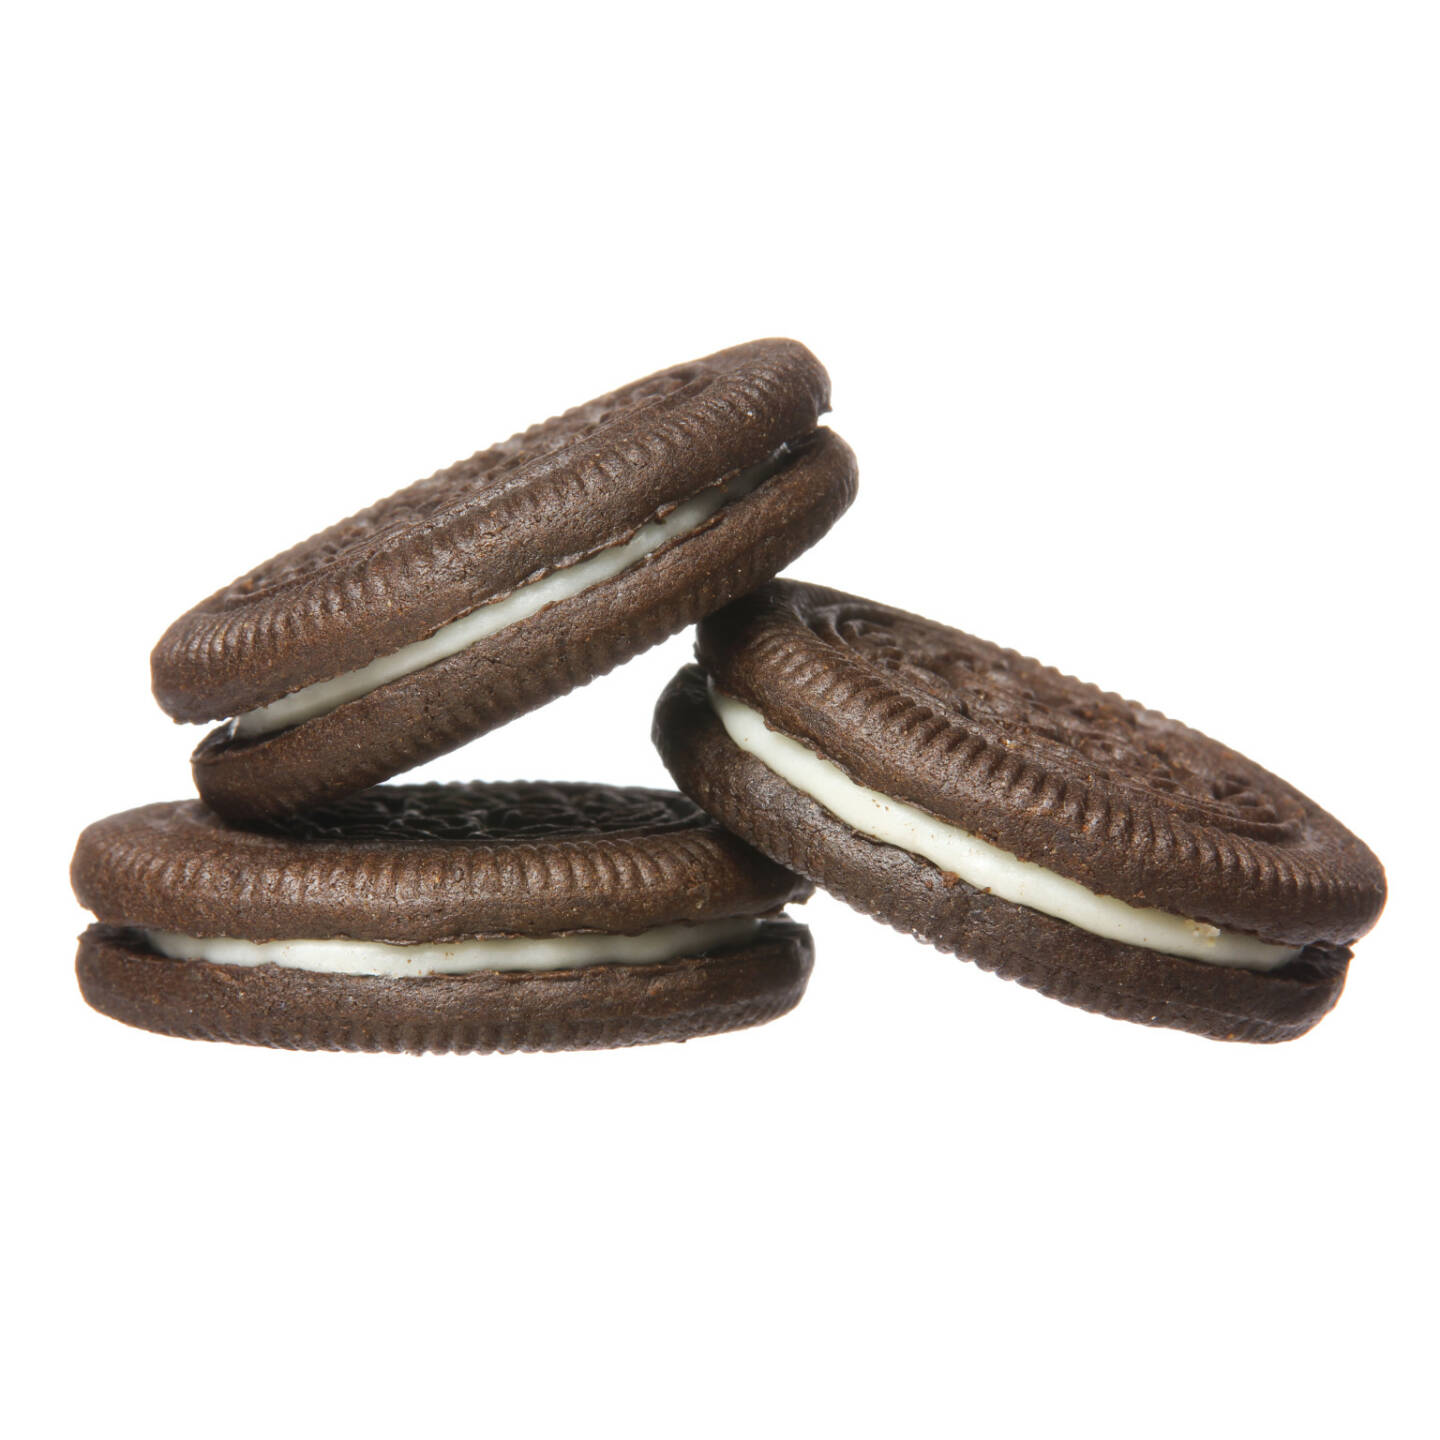 Kekse, drei, Oreo - http://www.shutterstock.com/de/pic-151592543/stock-photo-chocolate-cookies-with-cream-filling-isolated-on-white-background.html